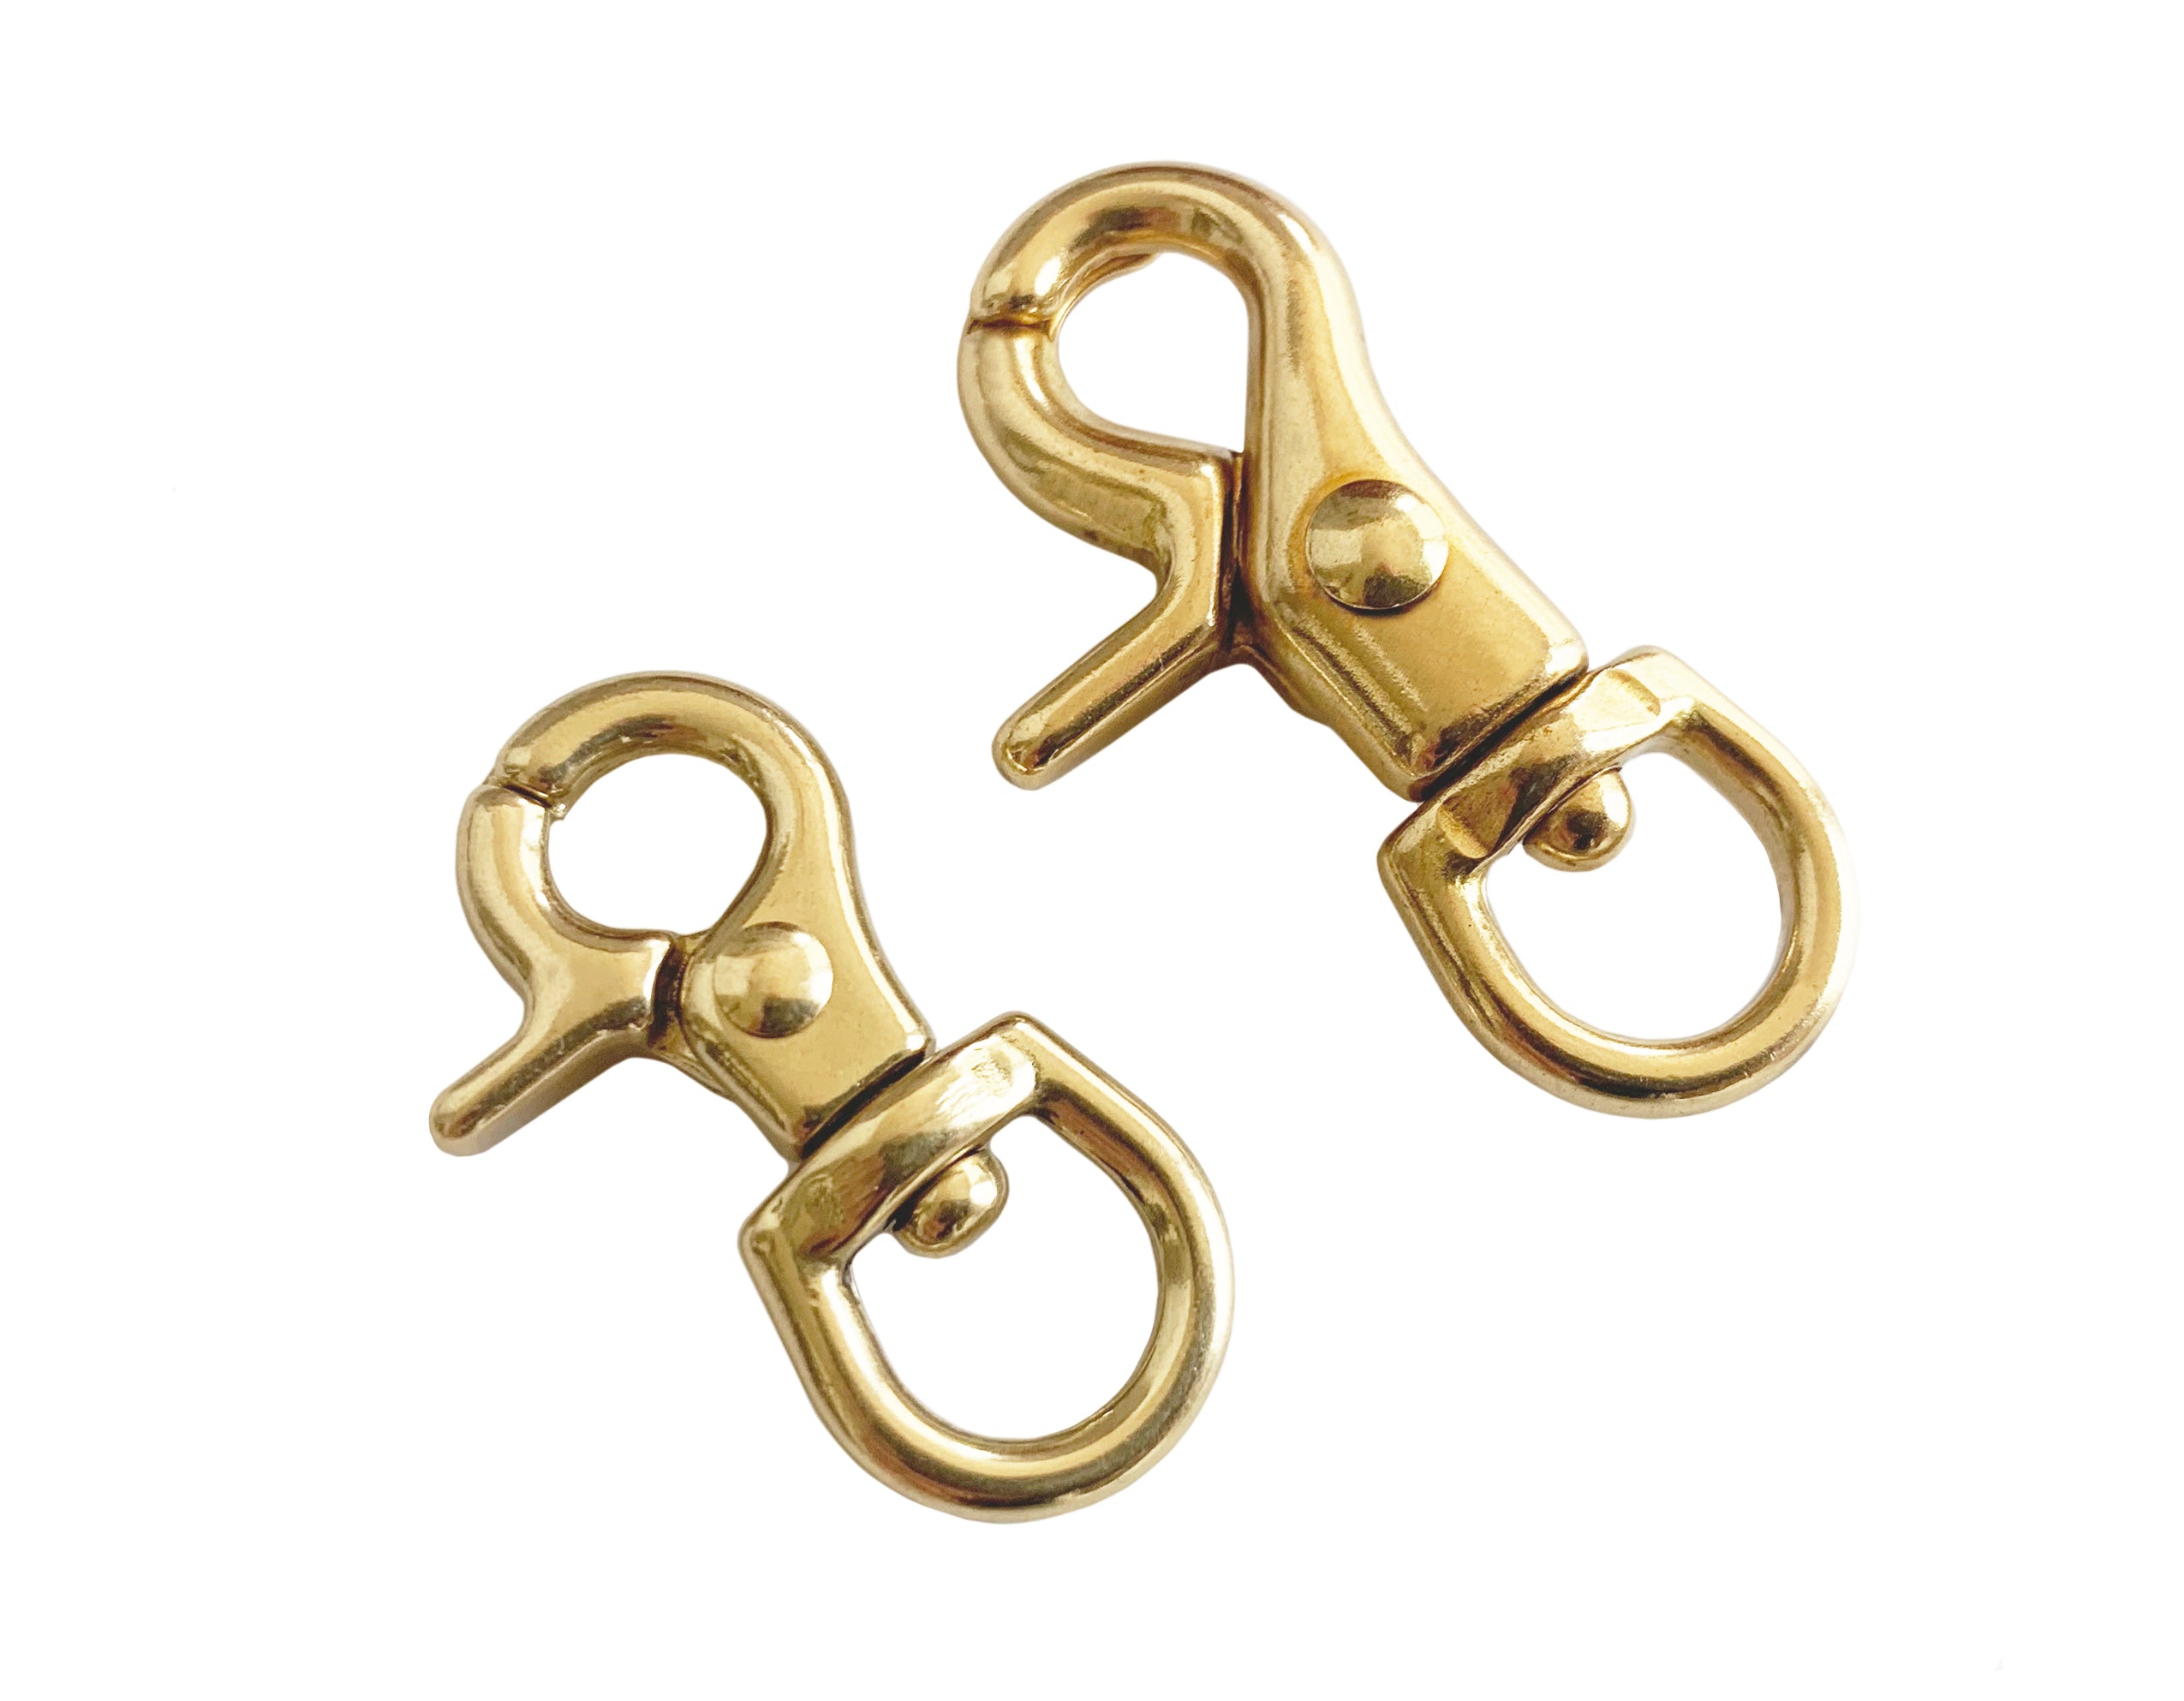 Quality Solid Brass 2-3/4 Trigger Snap Hooks 5/8 Swivel Round Eye Scissor  Snap Clips Heavy Duty for Pet Leashes, Purse Straps and Belting